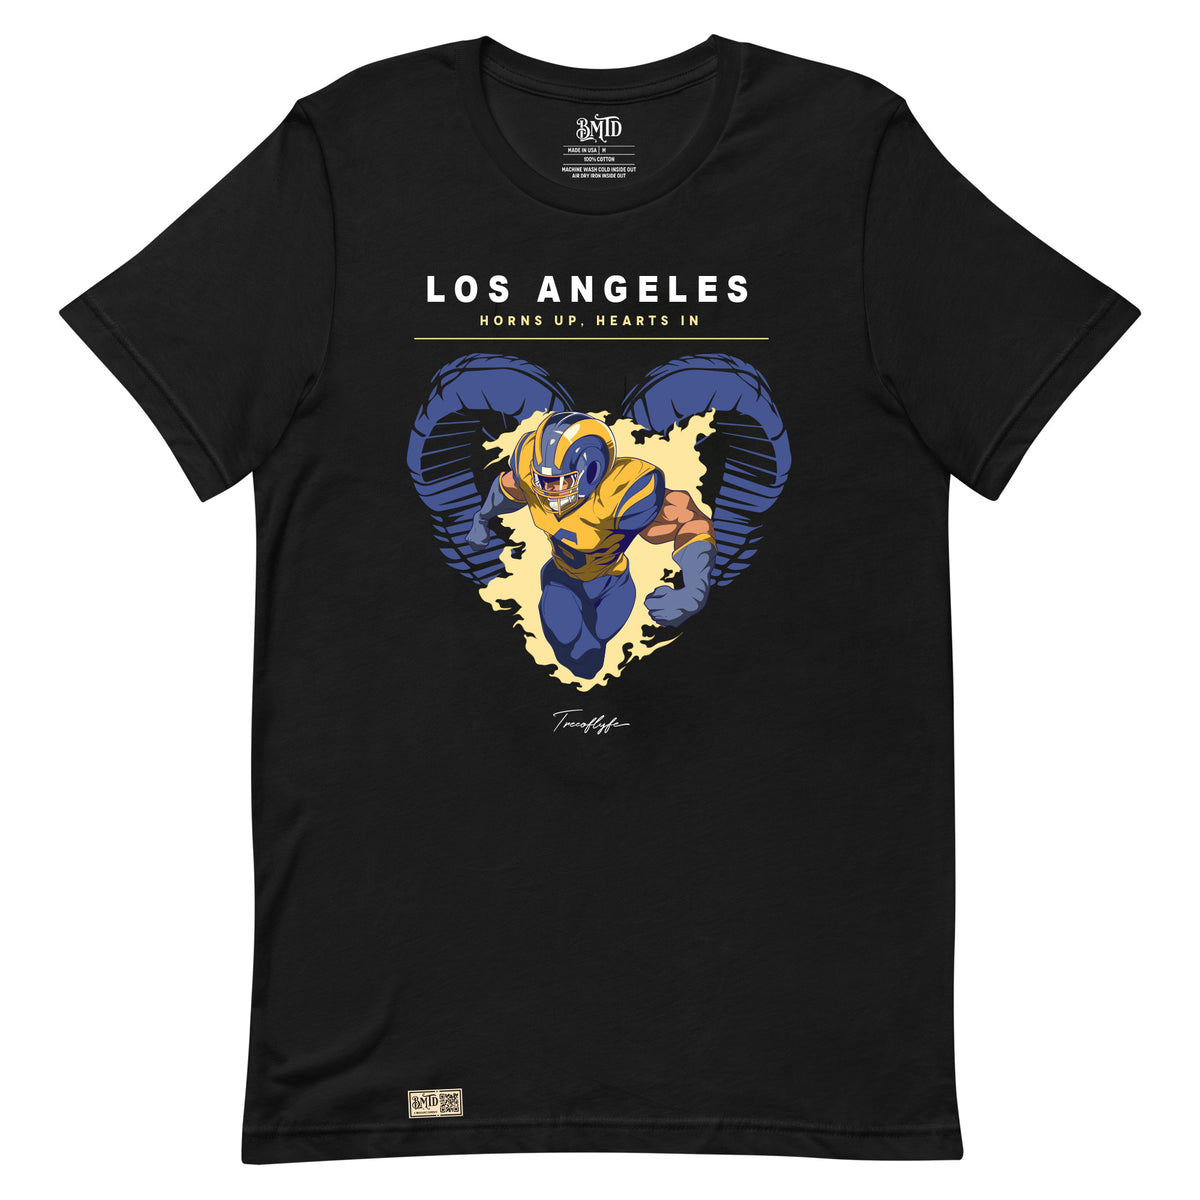 Los Angeles Horns up, Hearts In T-shirt